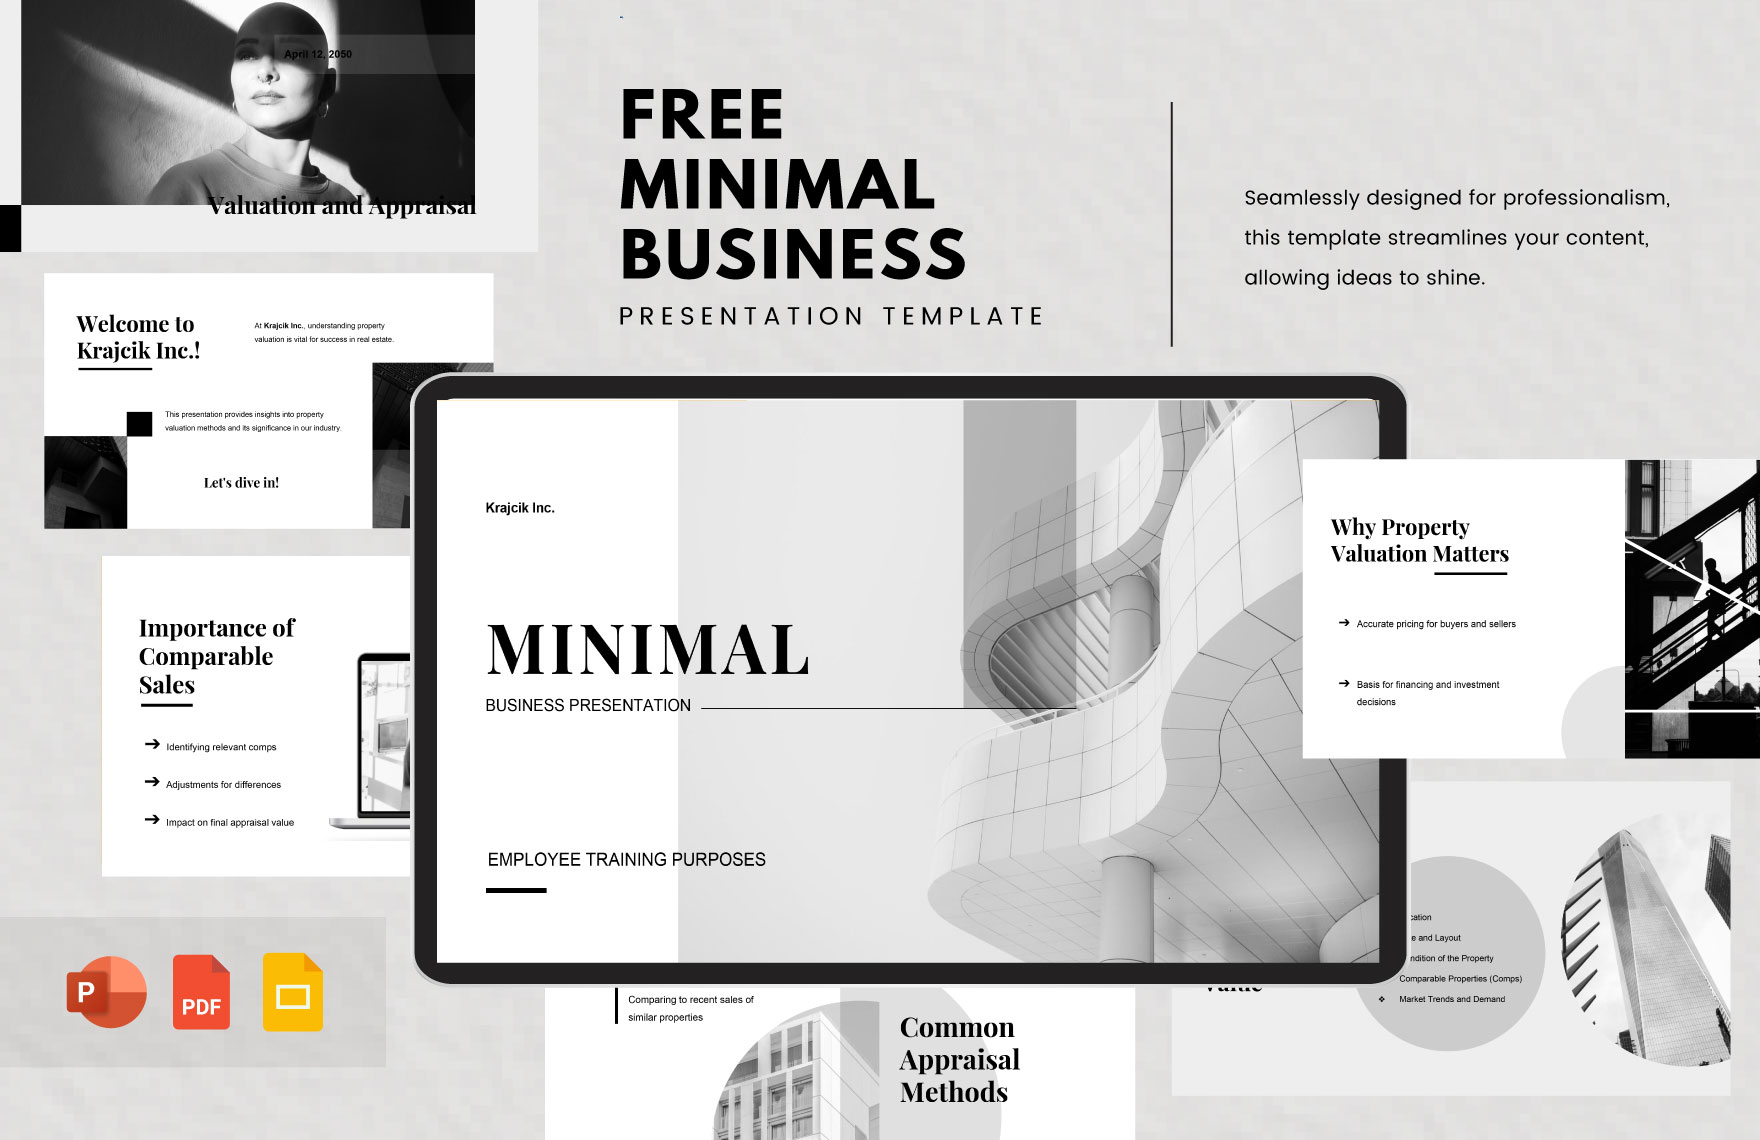 Free Minimal Business Presentation Template - Download in PDF ...